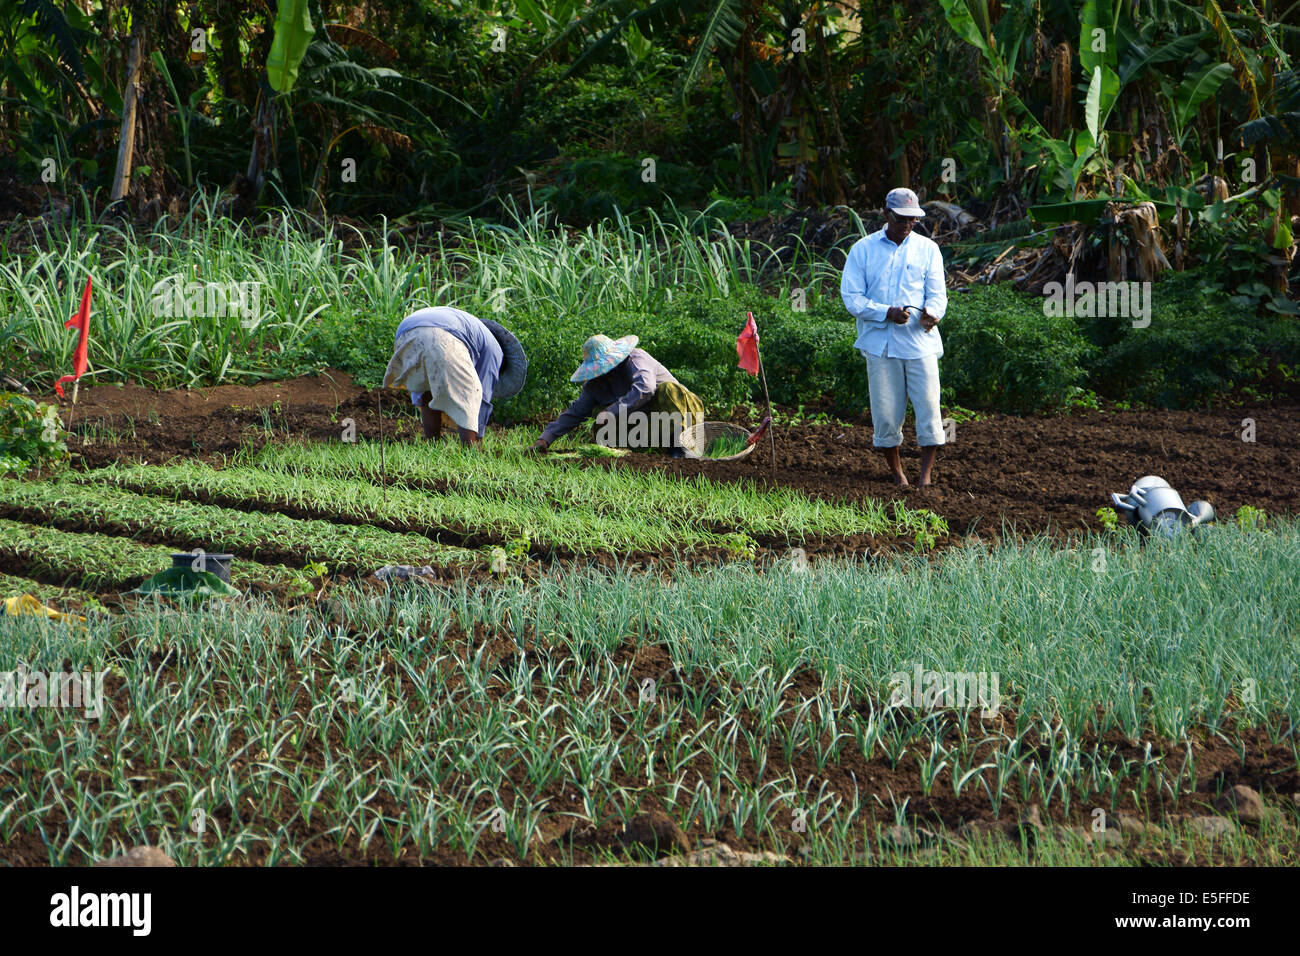 People planting onions in vegetable garden, east coast, Island Mauritius Stock Photo